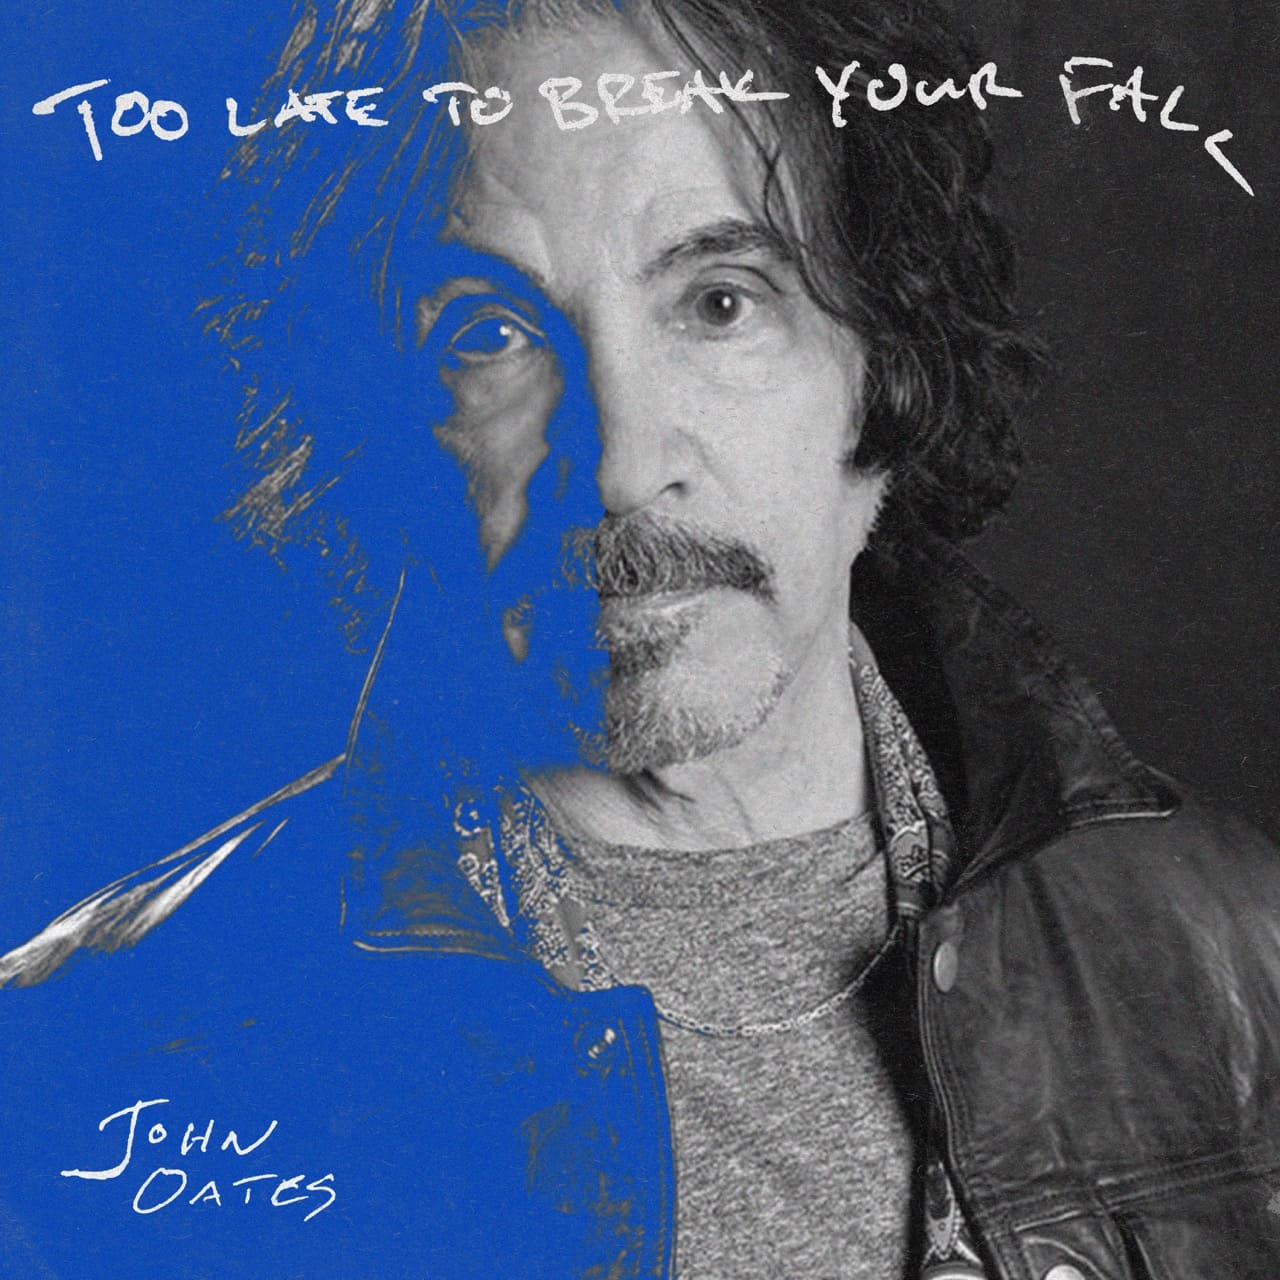 Too Late To Break Your Fall by John Oates